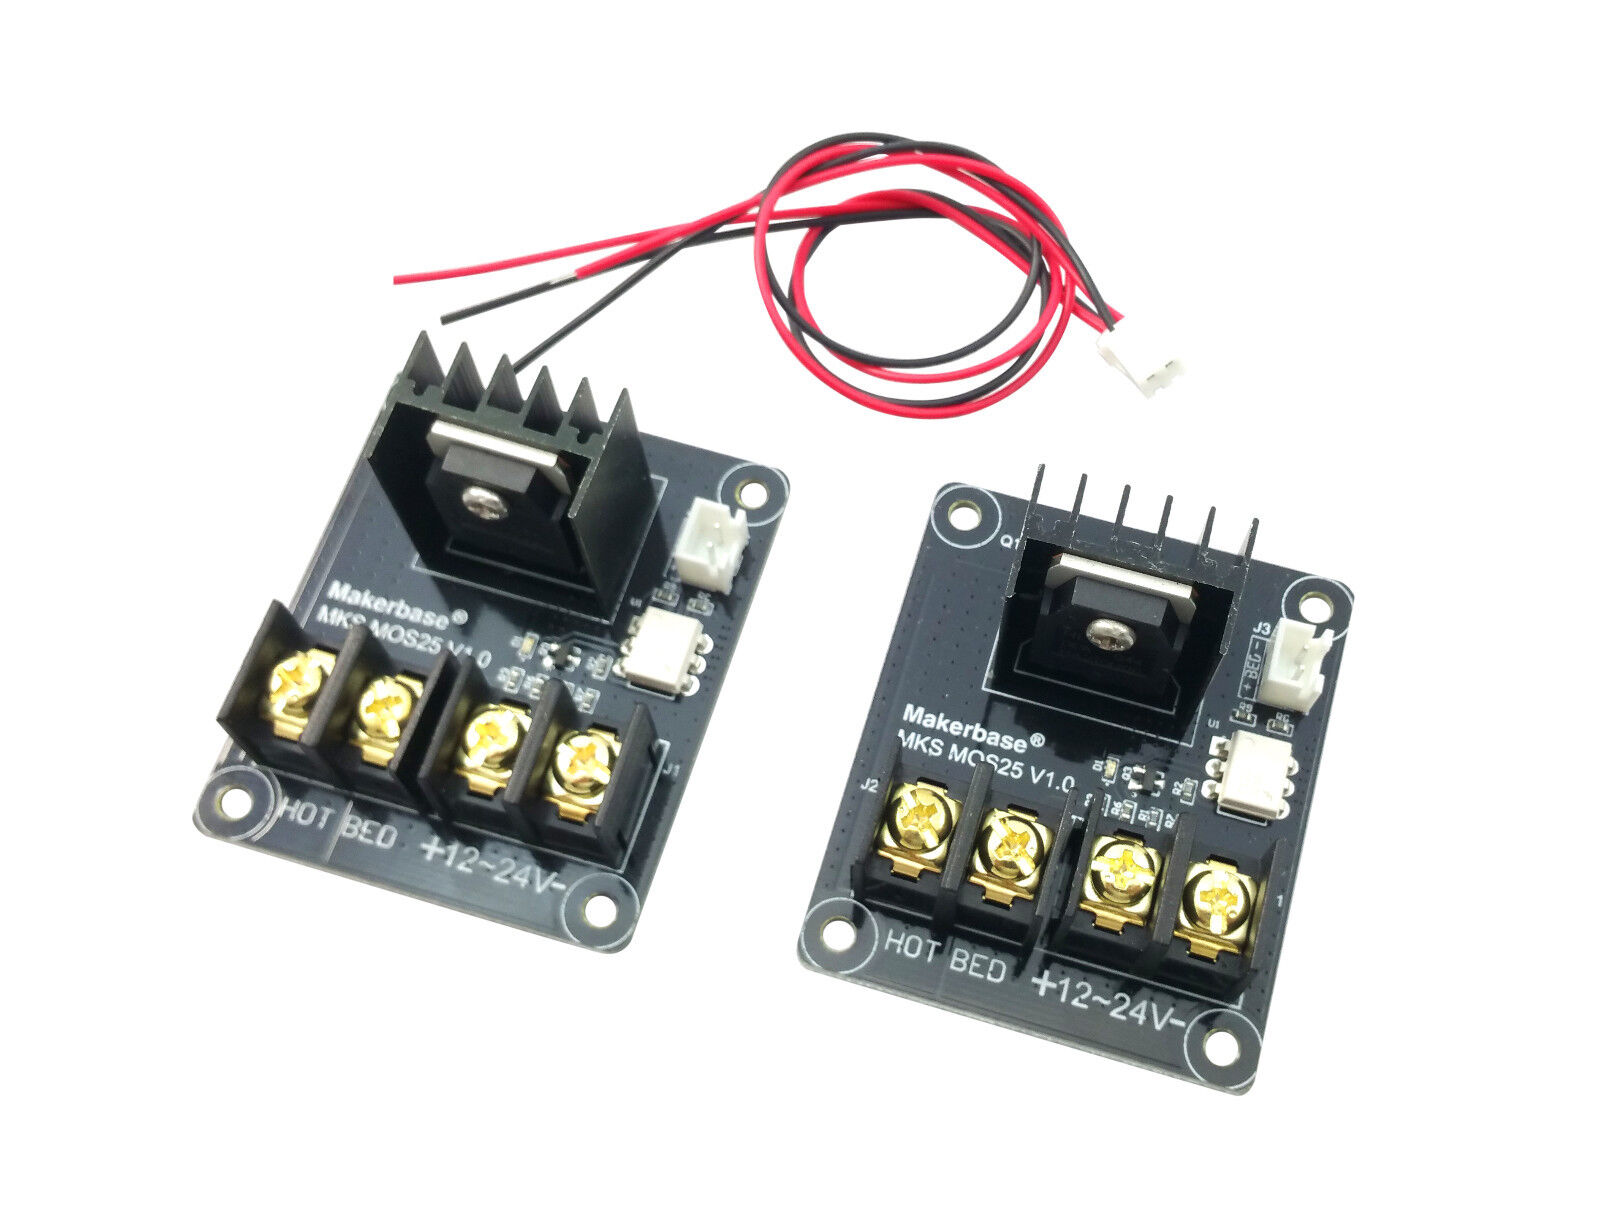 2pcs Monoprice Maker Select MOSFET Board 3D Printer Heated Bed Module i3 Heatbed